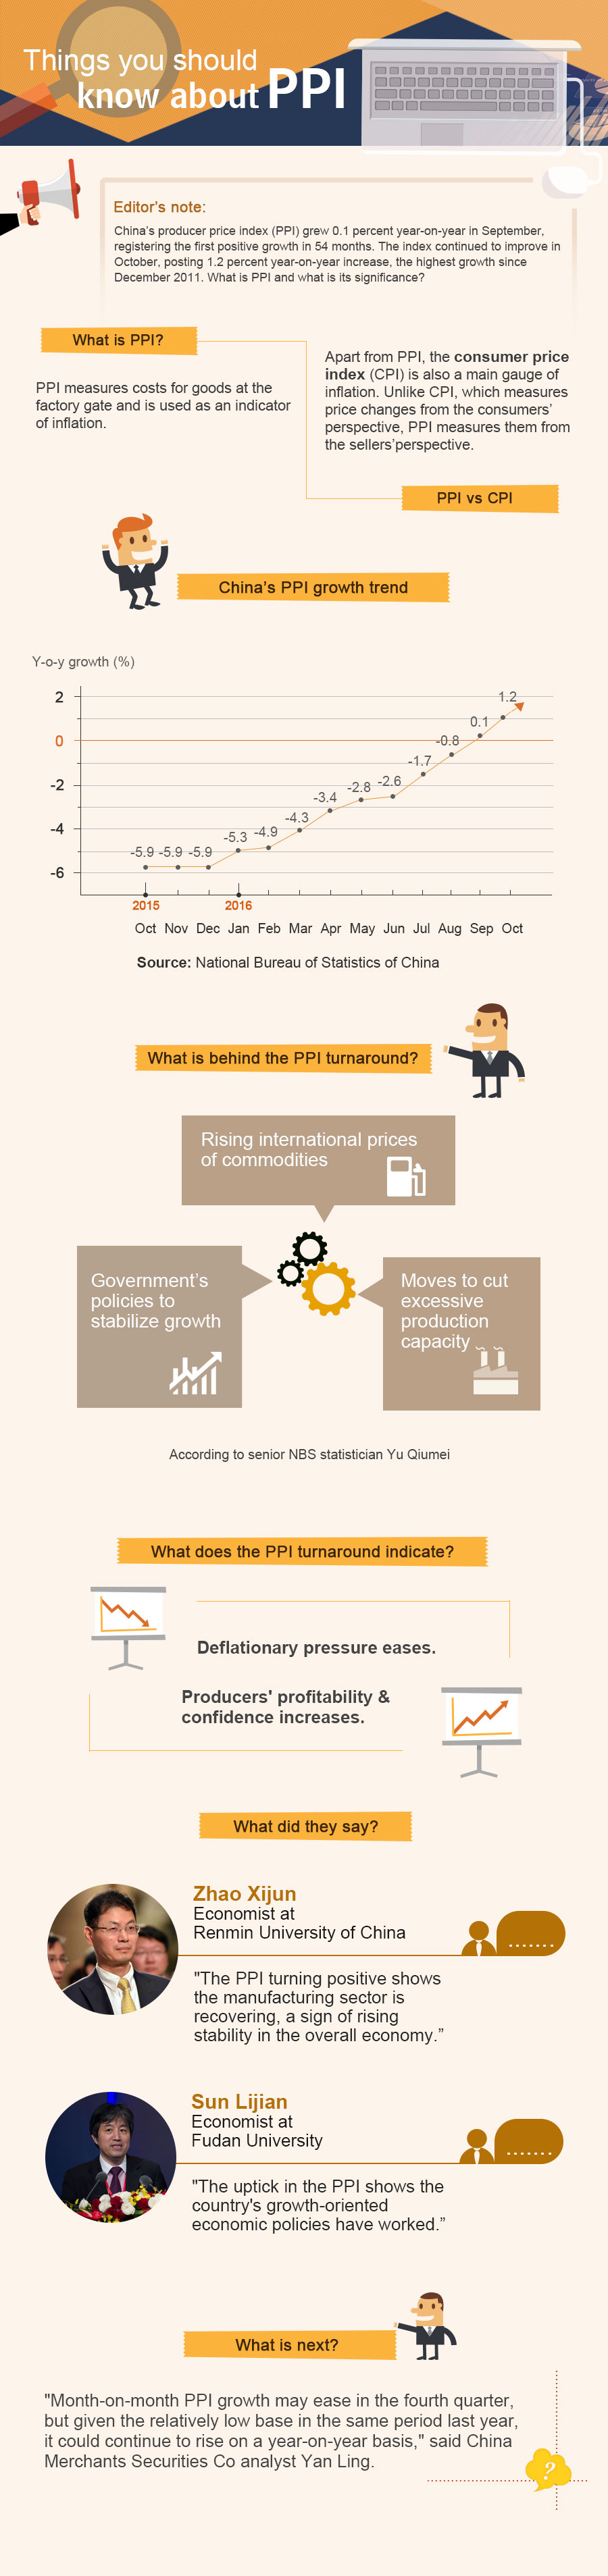 Things you should know about PPI